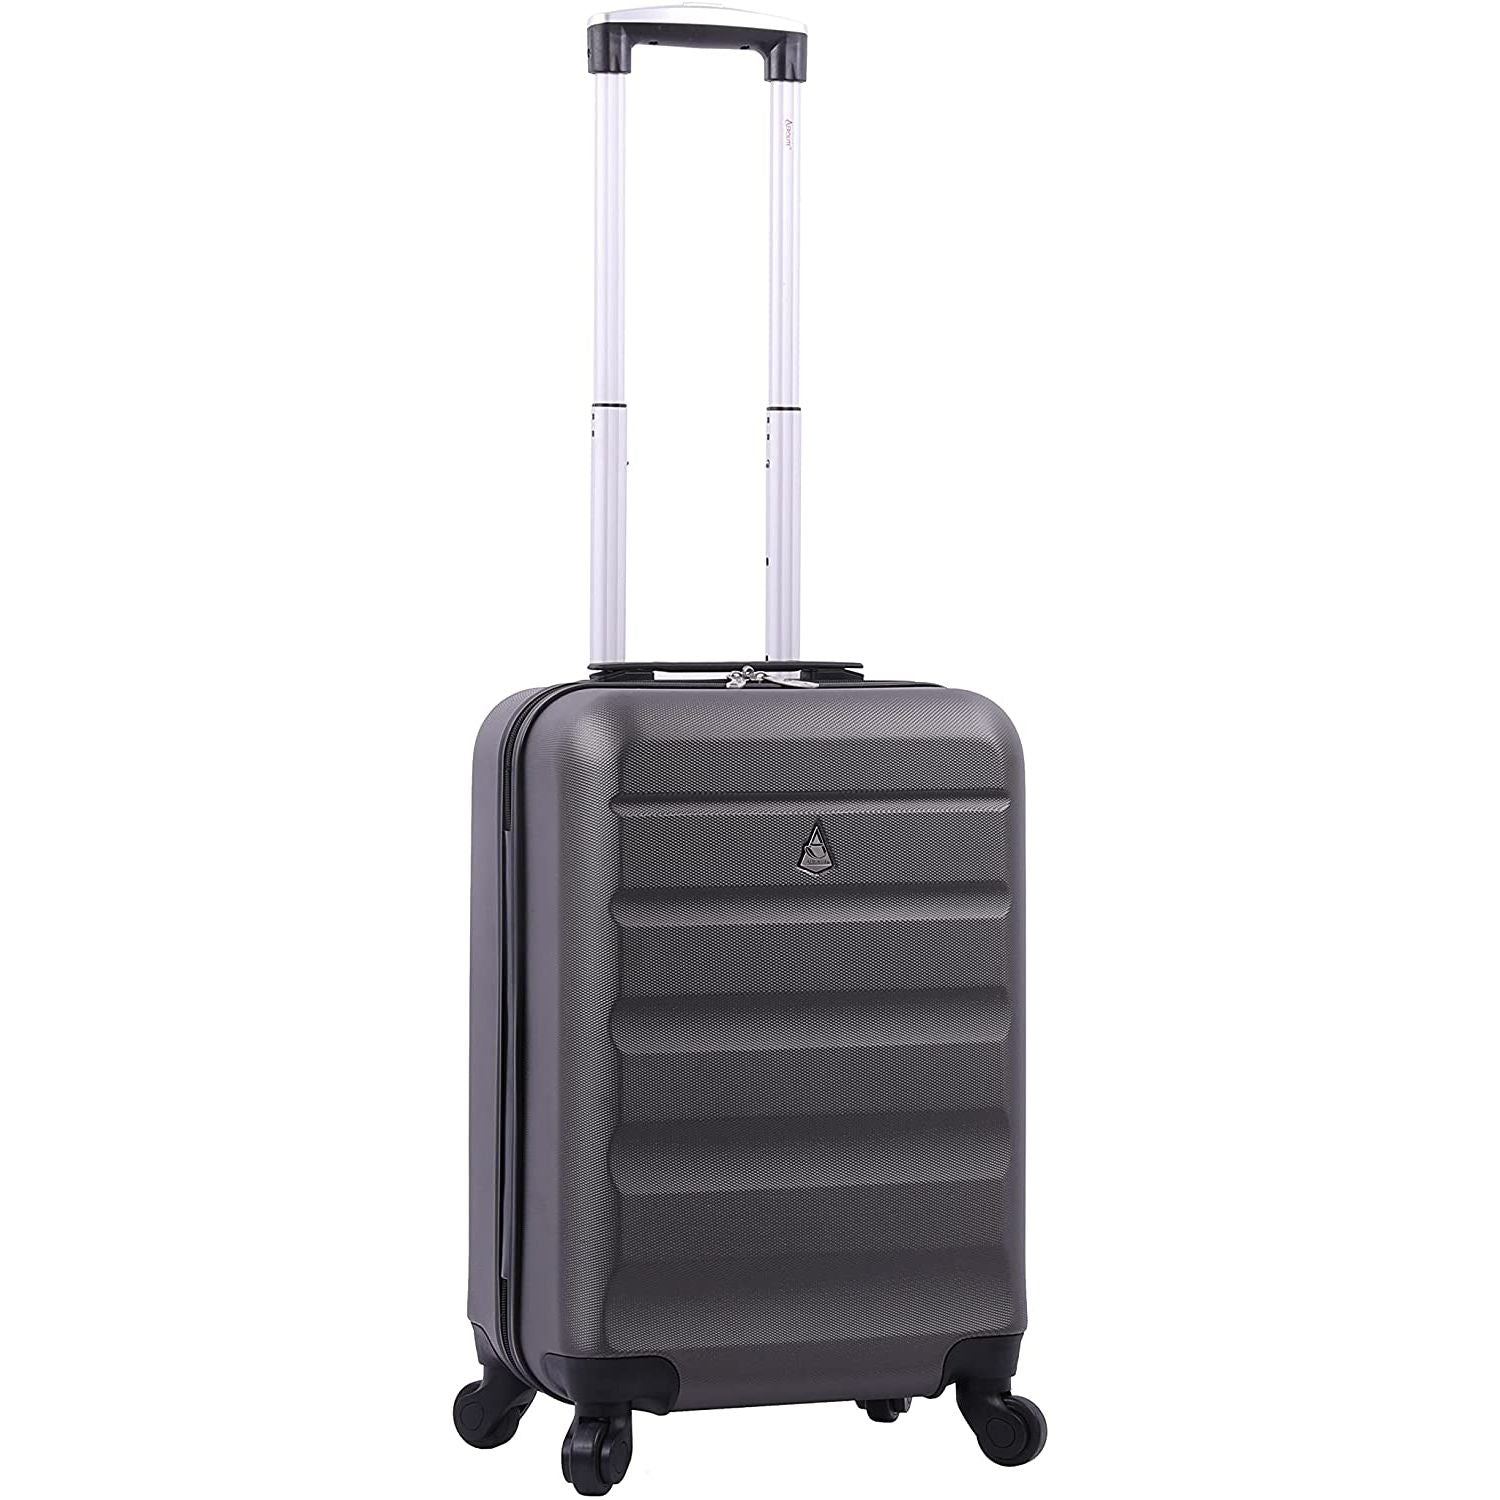 Aerolite (55x35x25cm) Hard Shell Carry On Hand Cabin Luggage Suitcase with 4 Wheels, Max Size for Air Europa, Air France, Alitalia, KLM & Transavia